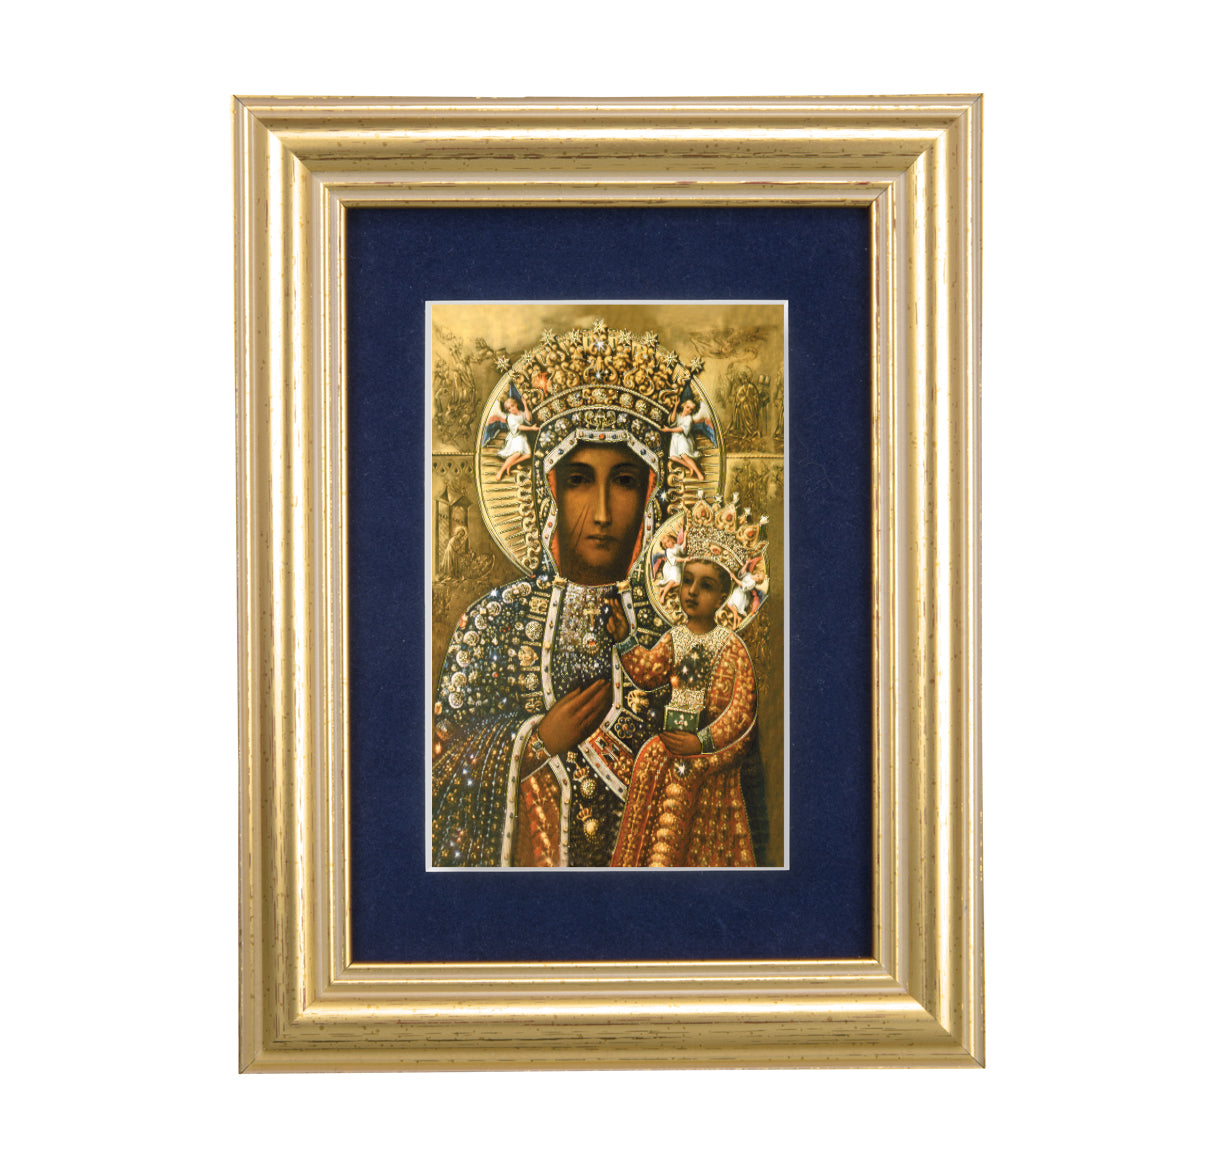 Our Lady of Czestochowa Gold Framed Art with Blue Velvet Matting